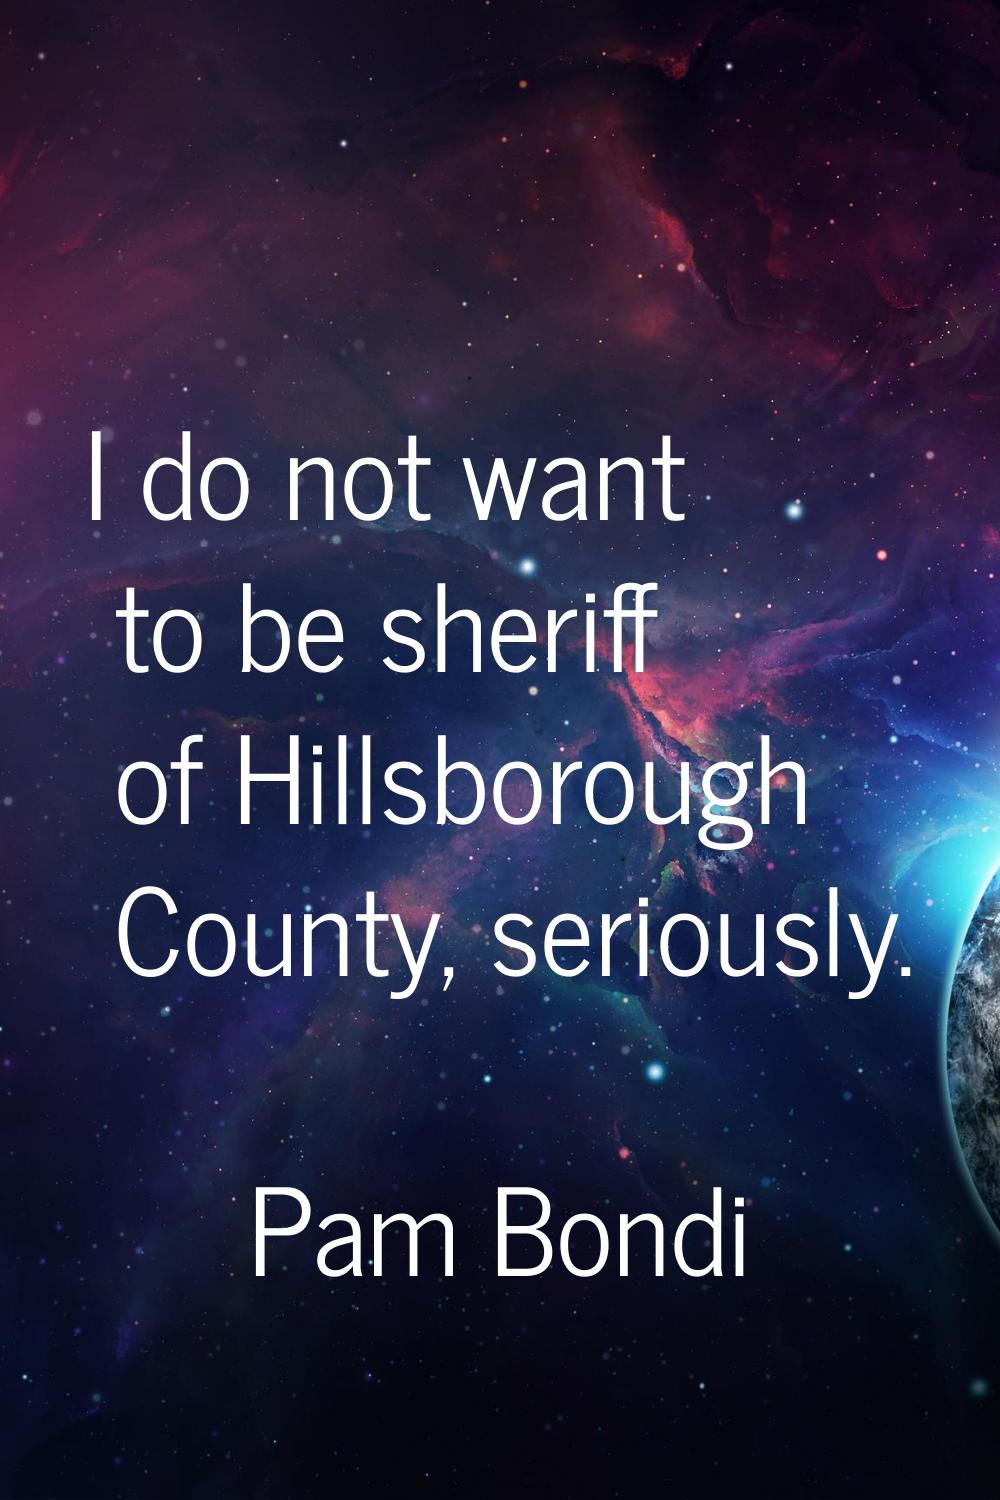 I do not want to be sheriff of Hillsborough County, seriously.